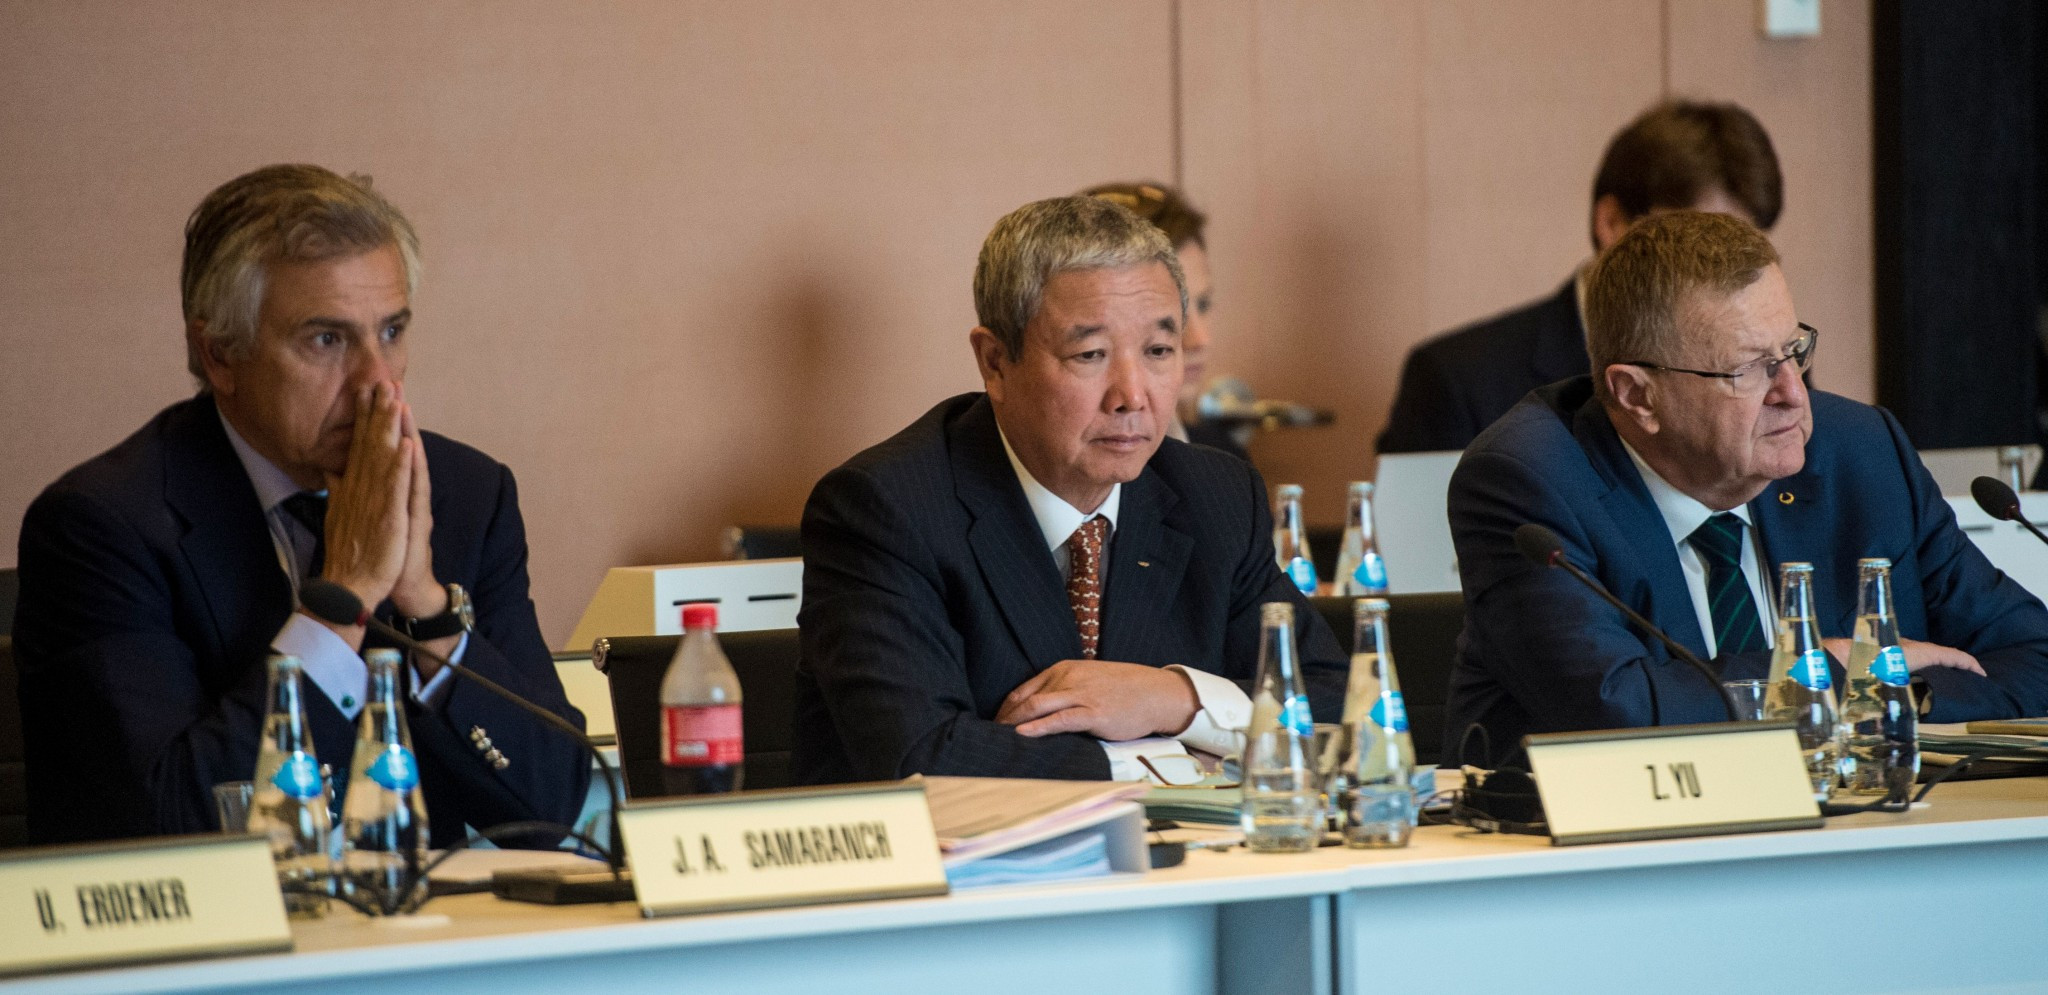 Preparations for the Tokyo 2020 Olympics were also briefly discussed ©IOC